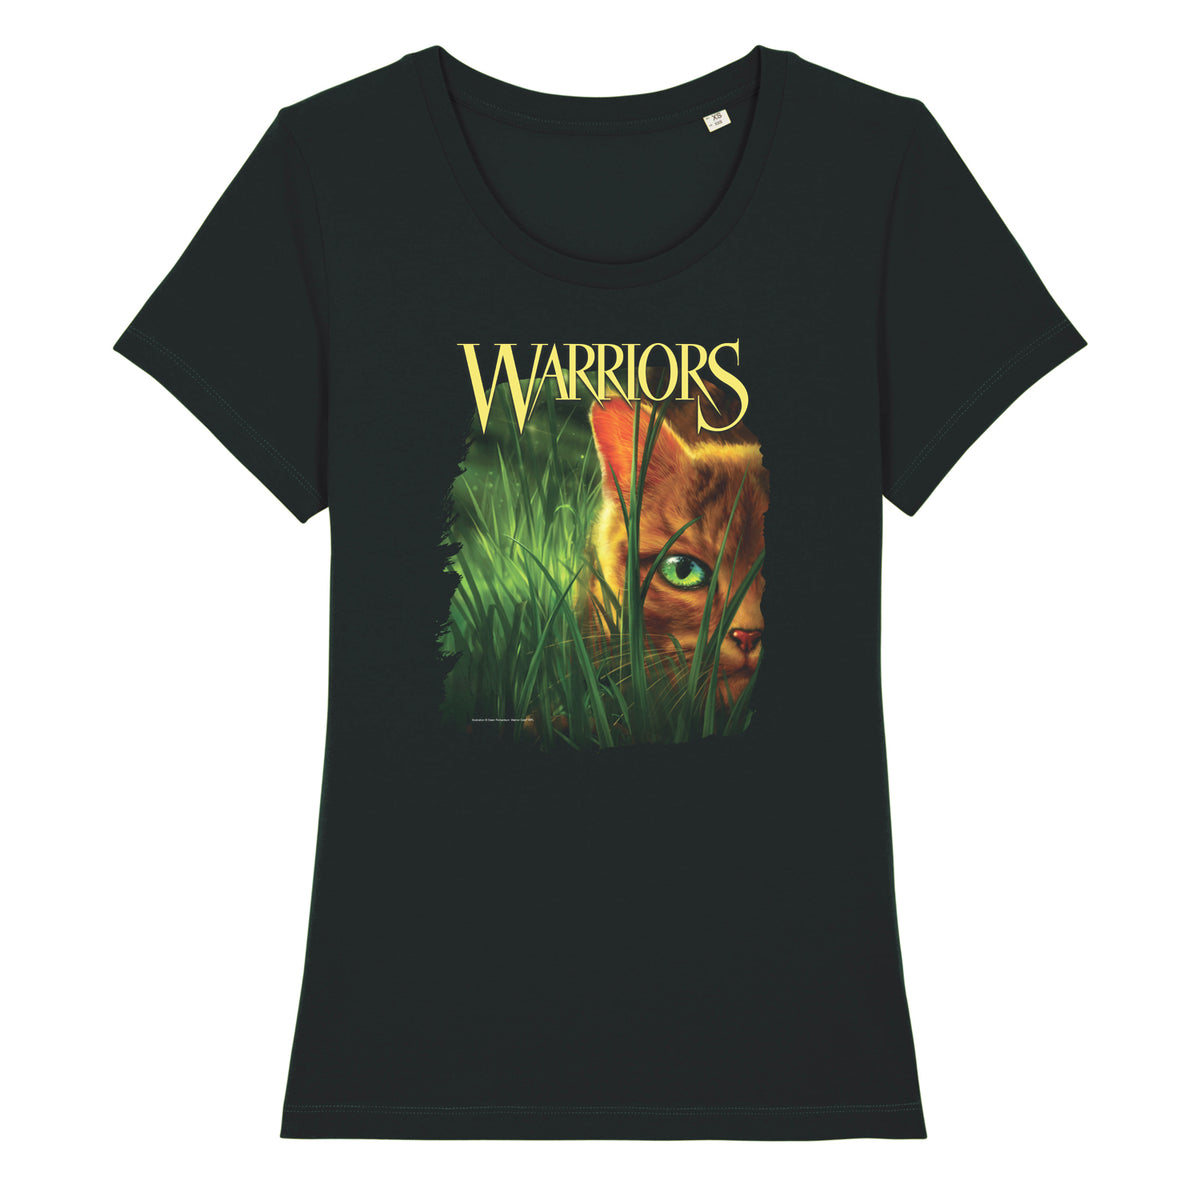 Into The Wild - Adult Ladies T-Shirt